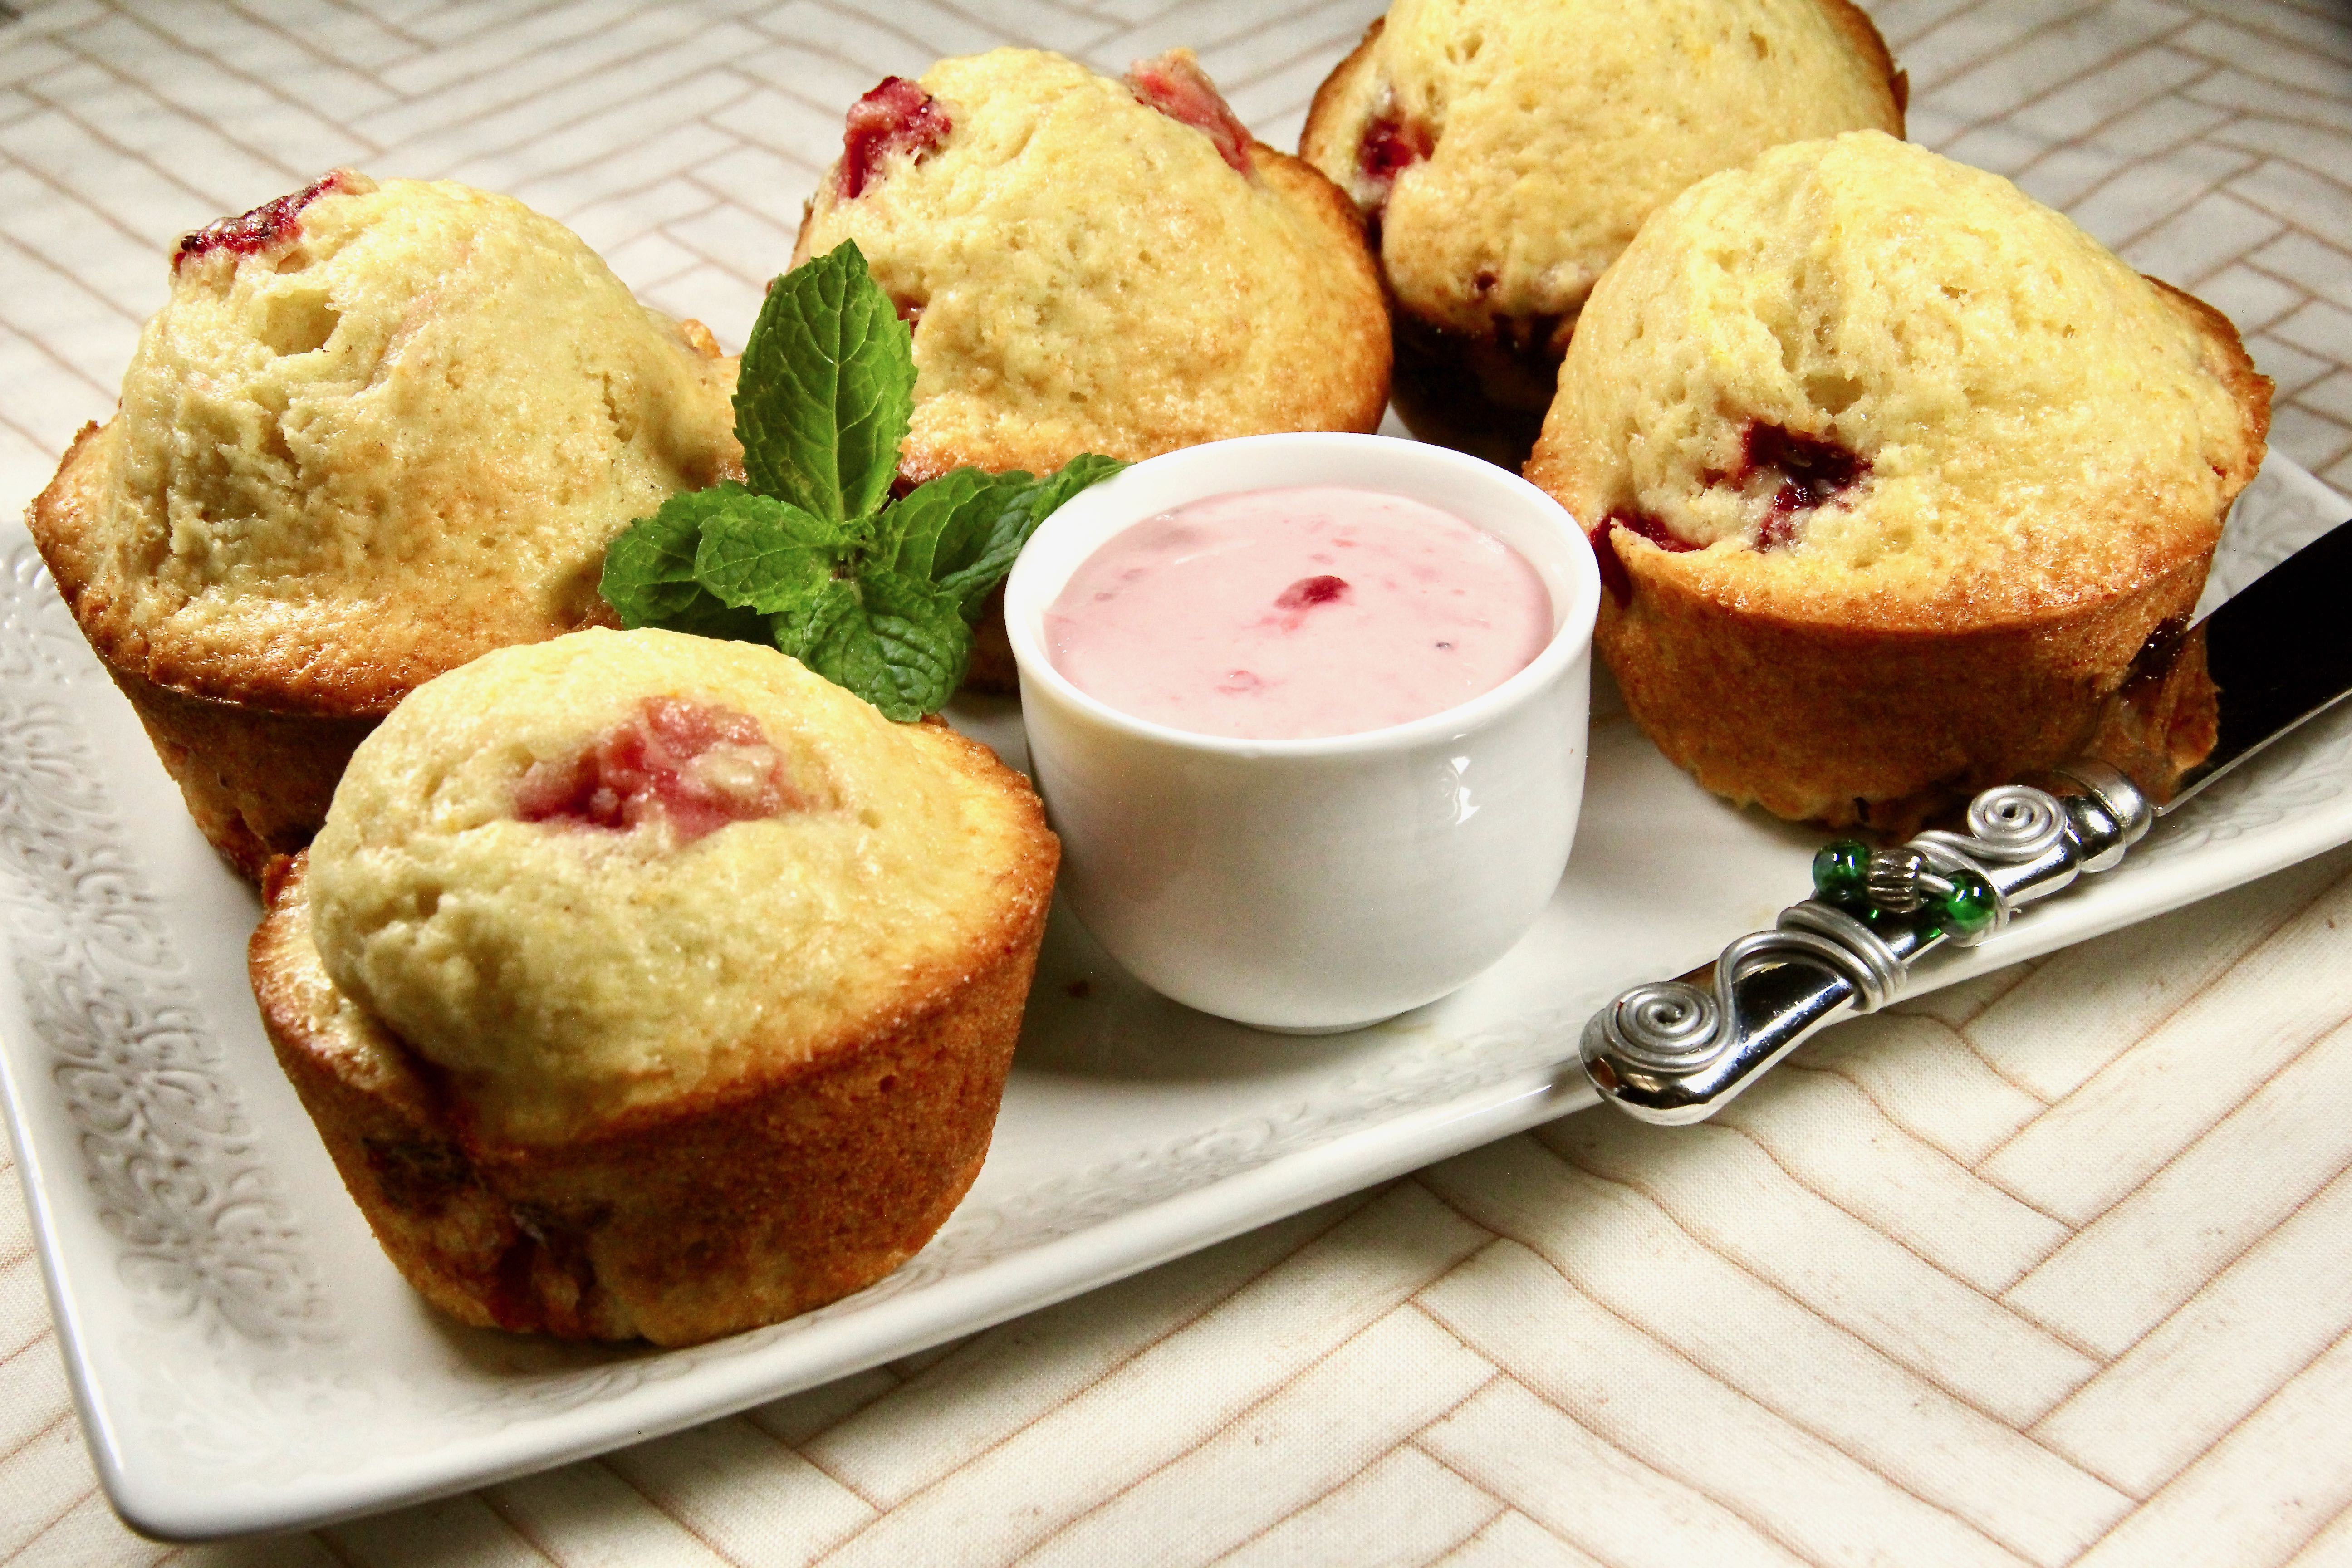 Strawberry Muffins with Cream Cheese Spread